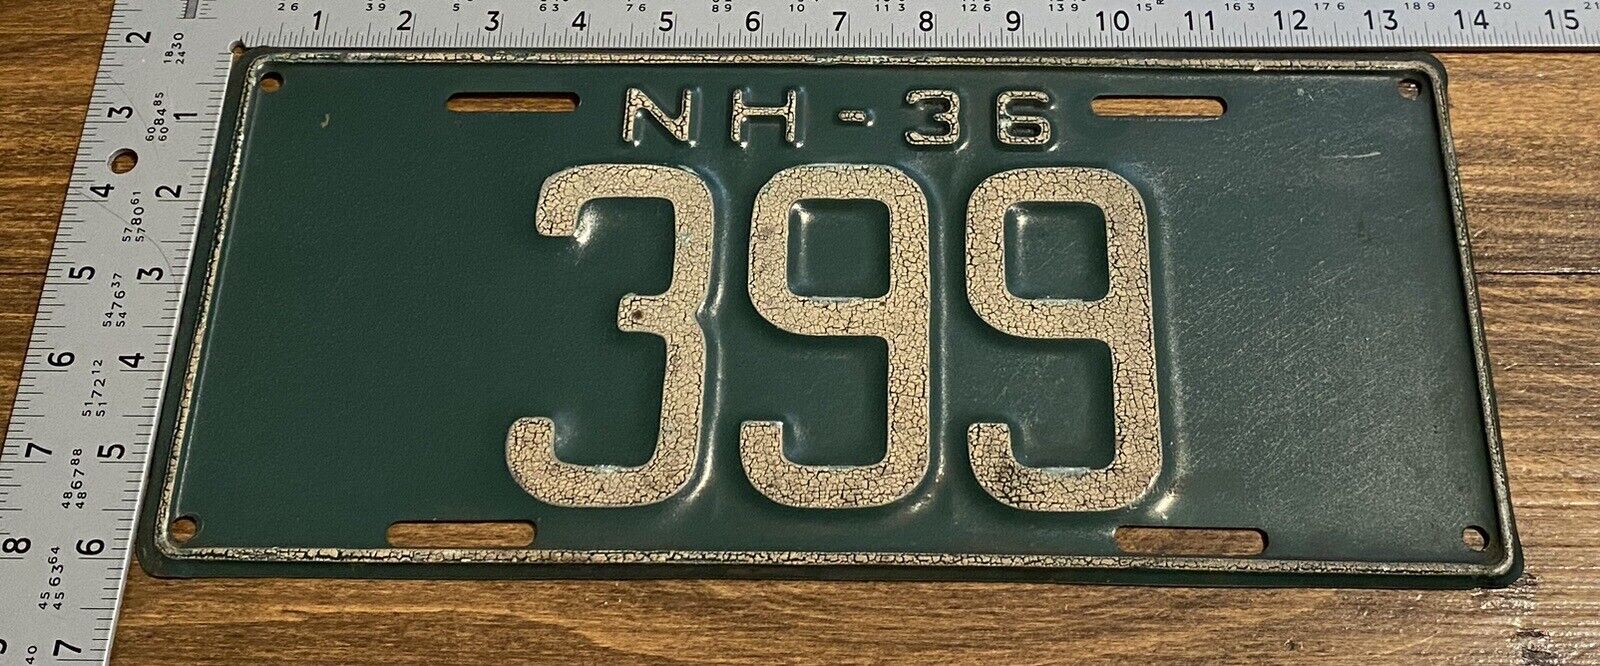 1936 New Hampshire License Plate 399 Garage Decor Low Number Green White ALPCA